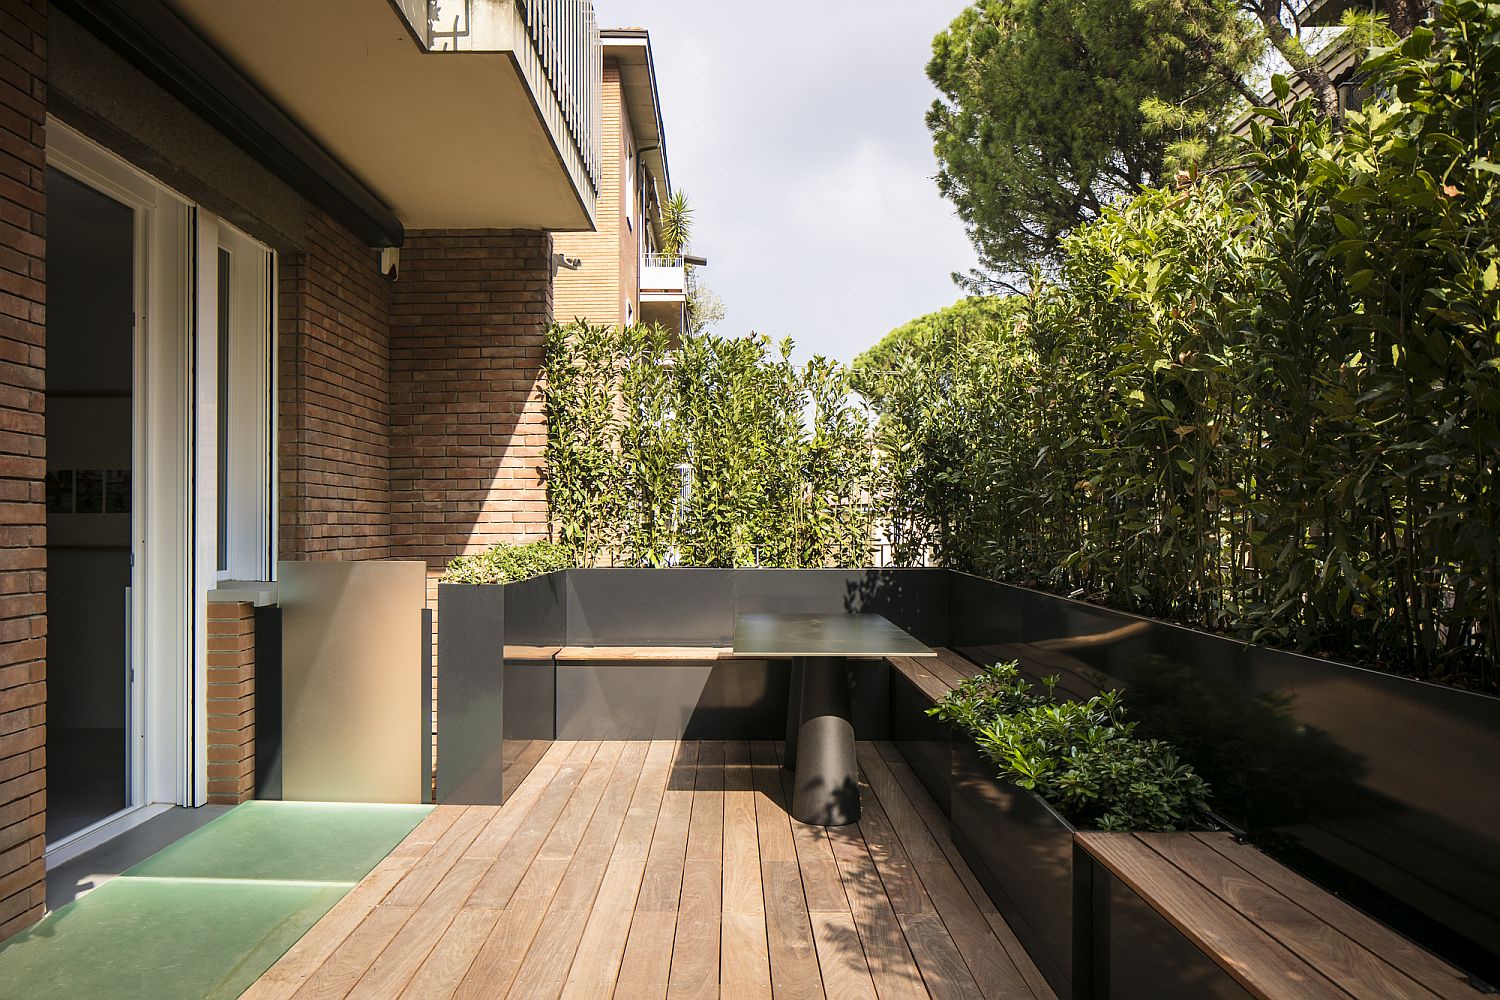 Wooden-deck-outside-the-kitchen-and-the-livig-area-of-the-Italian-apartment